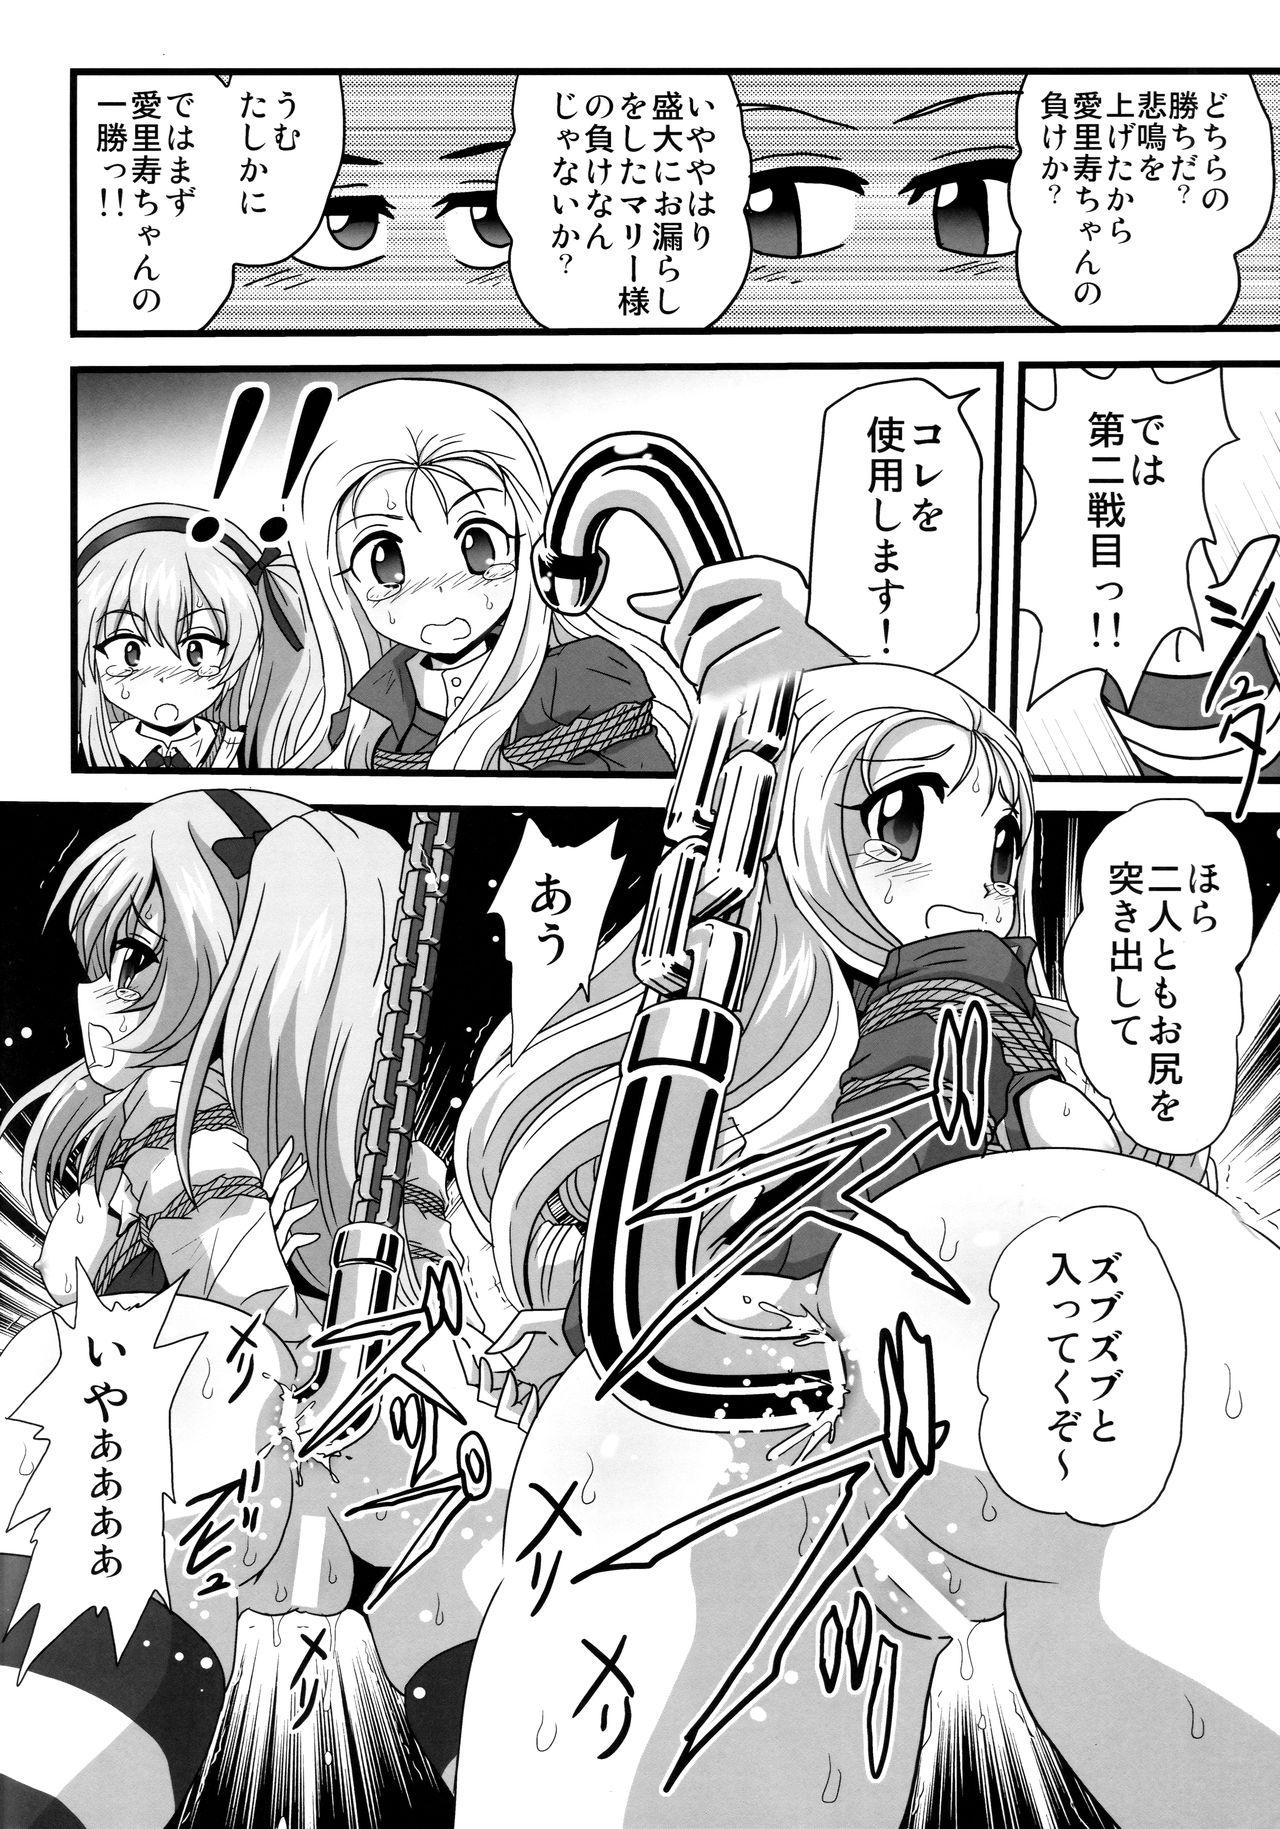 Gay Hairy G Panzer 25 - Girls und panzer Old And Young - Page 11